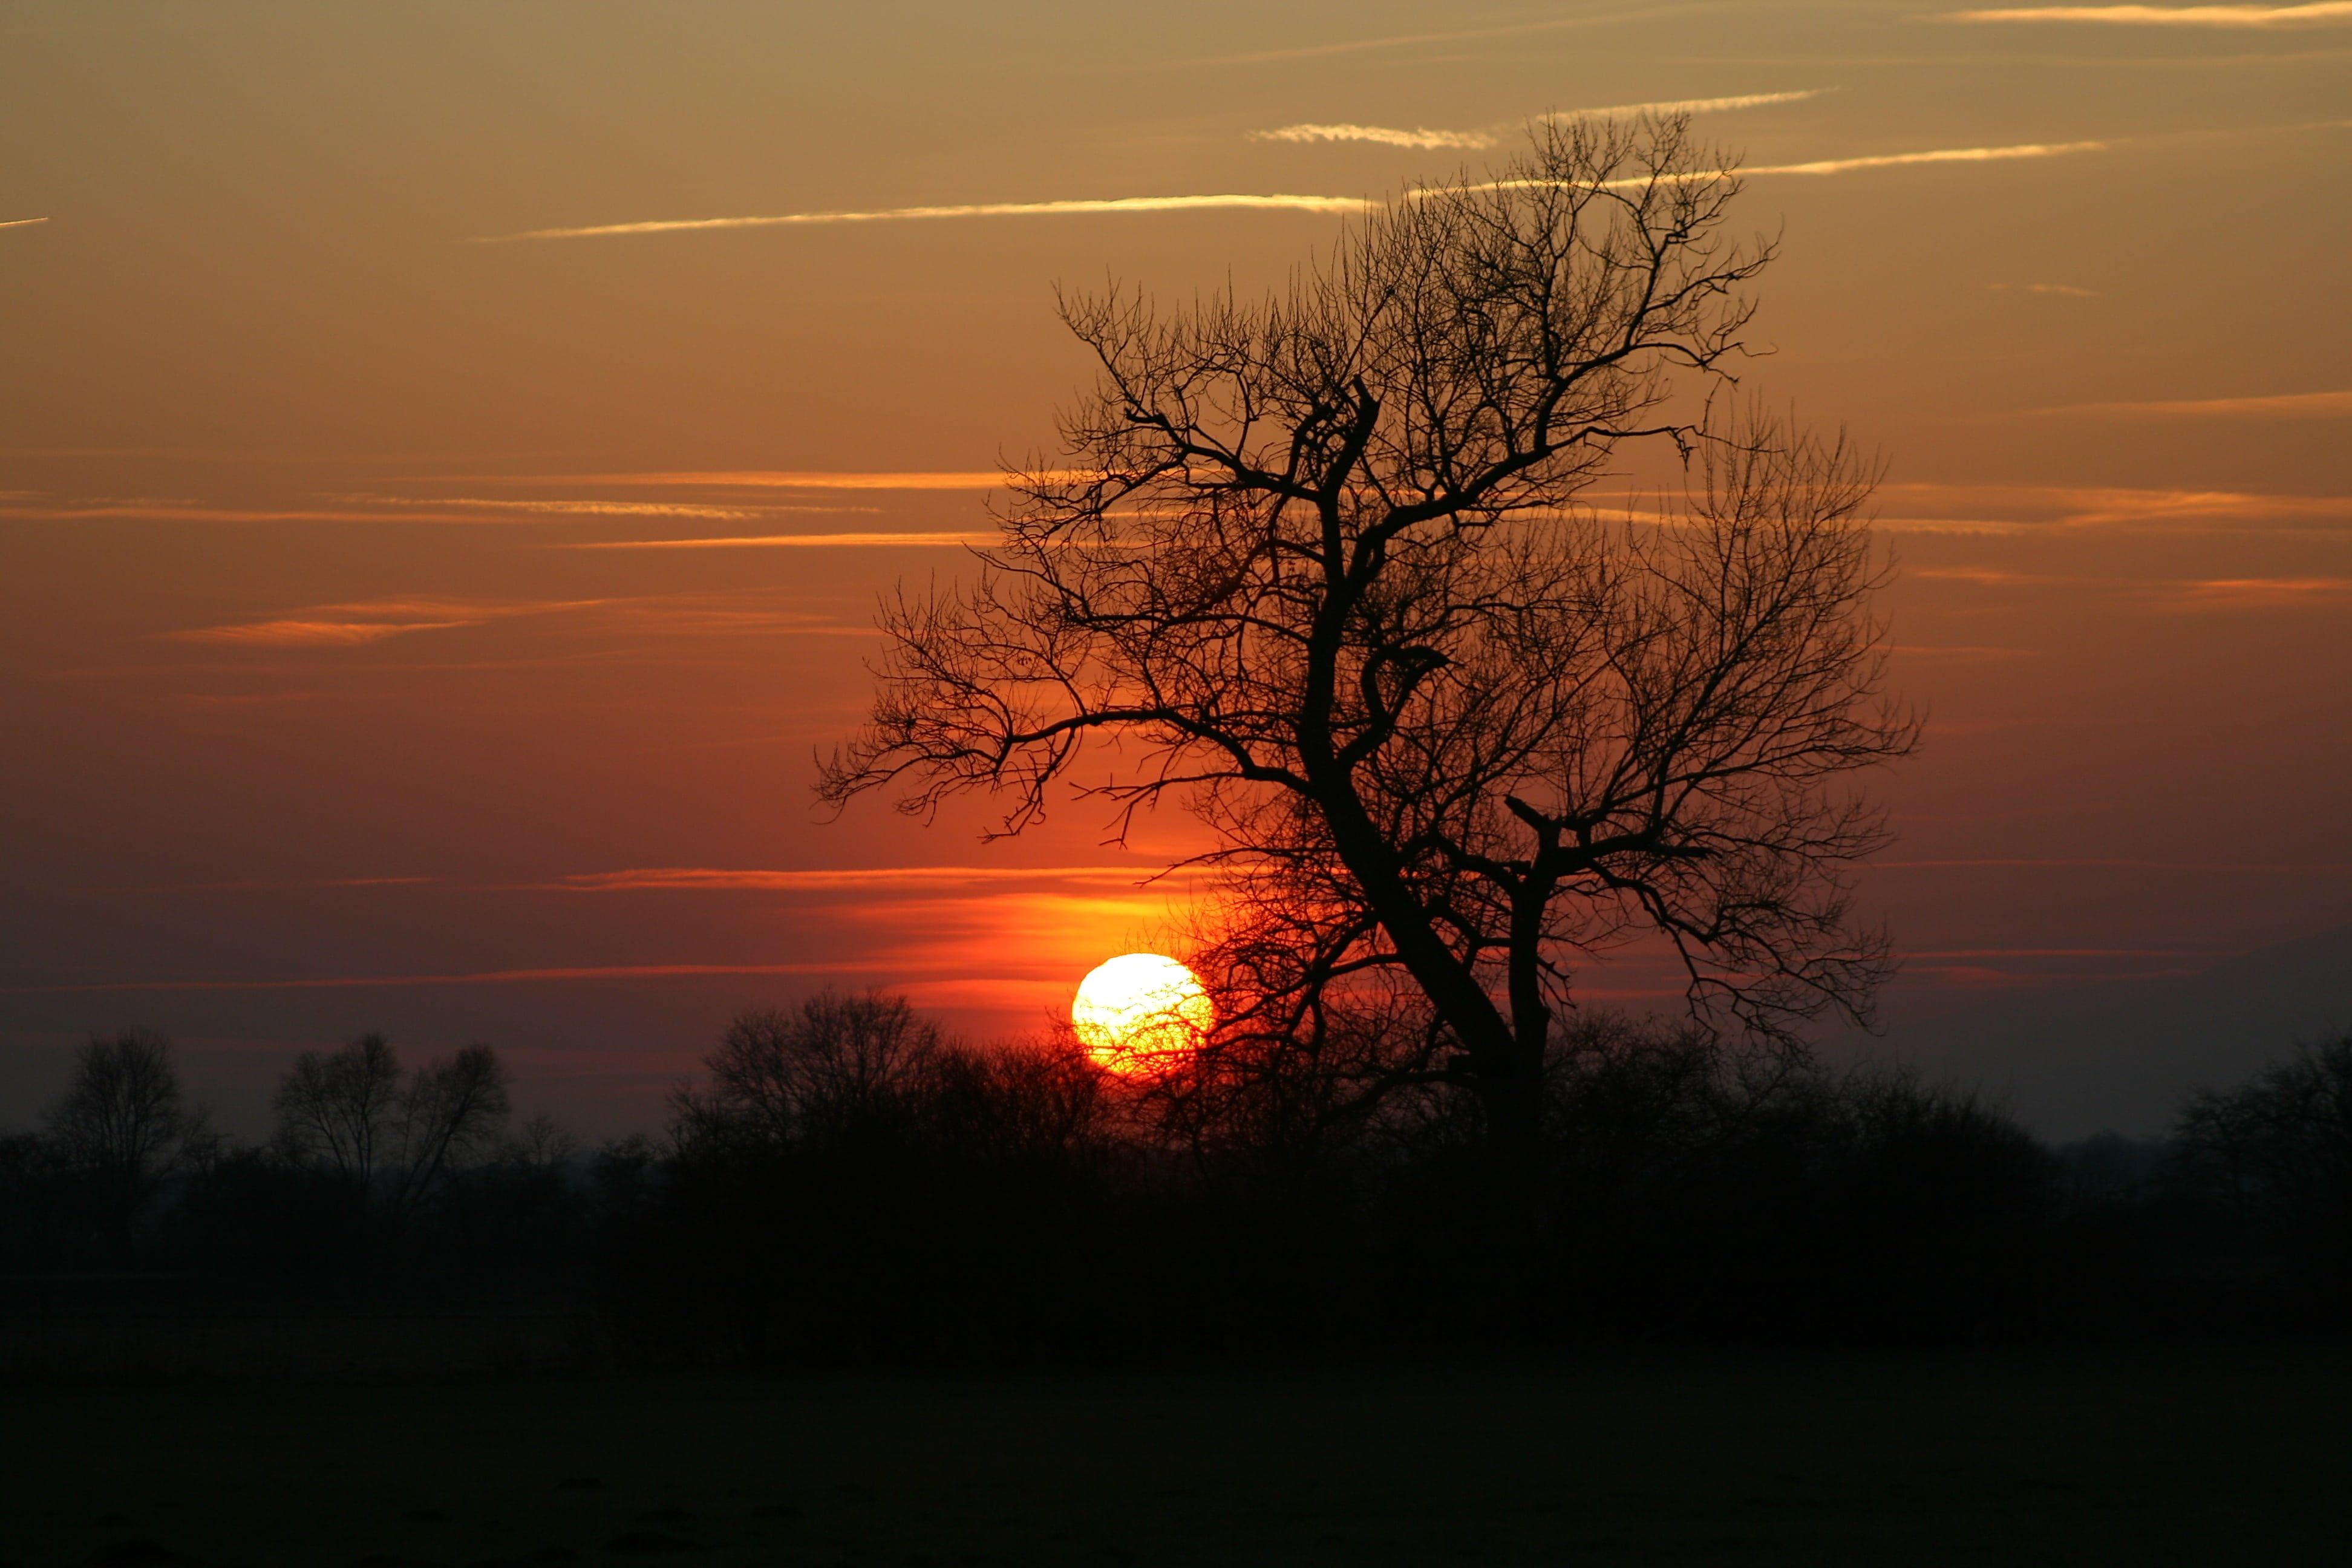 sunset and silhouette of trees, abendstimmung, twilight, dusk